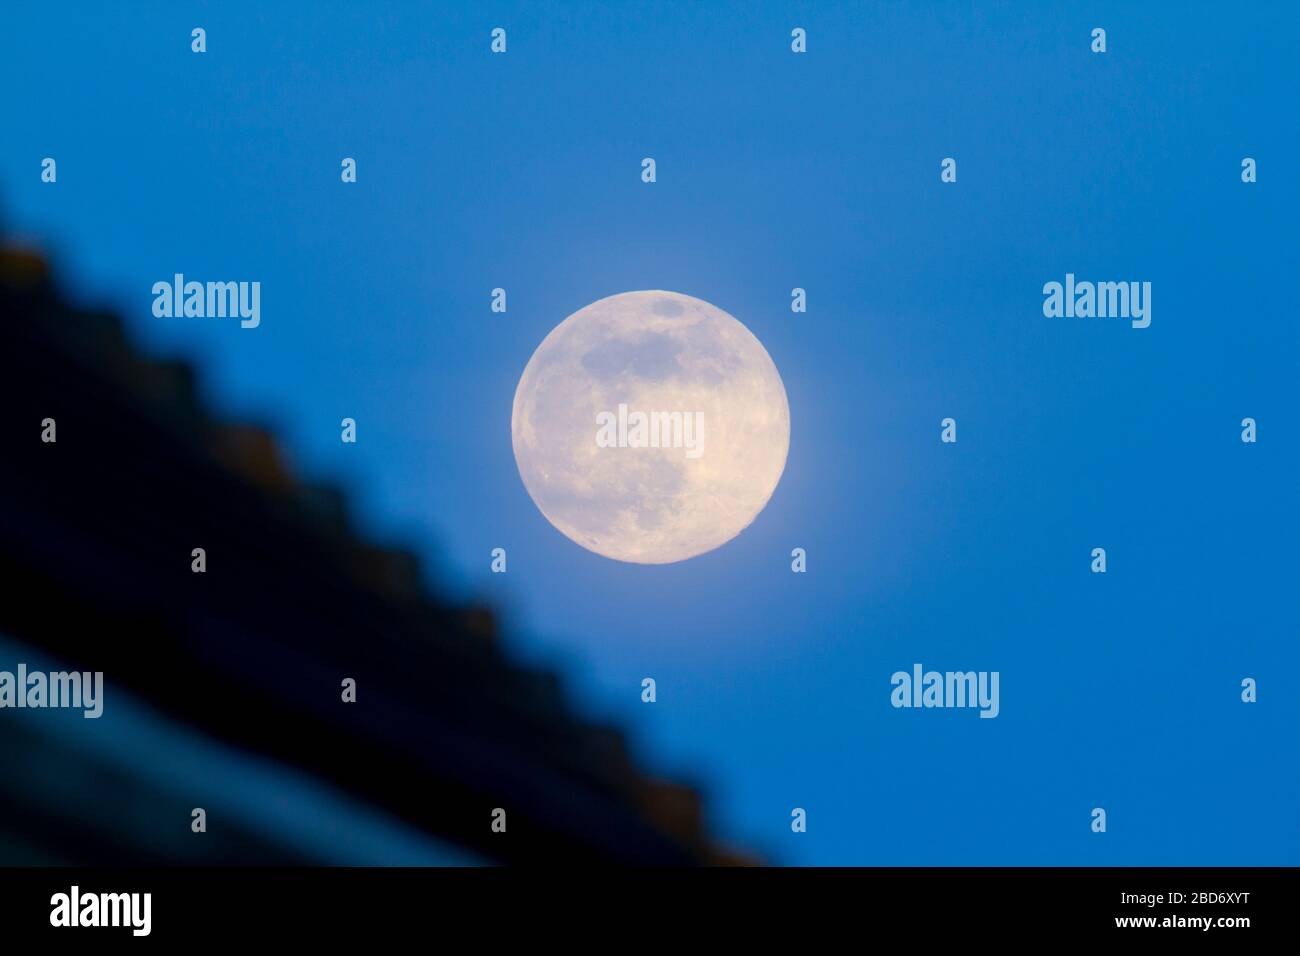 Hailsham, UK. 7th Apr 2020. UK weather. Light cloud cover this evening allowed for good views of this months full pink supermoon over Hailsham. Hailsham, East Sussex, UK. Credit: Ed Brown/Alamy Live News Stock Photo